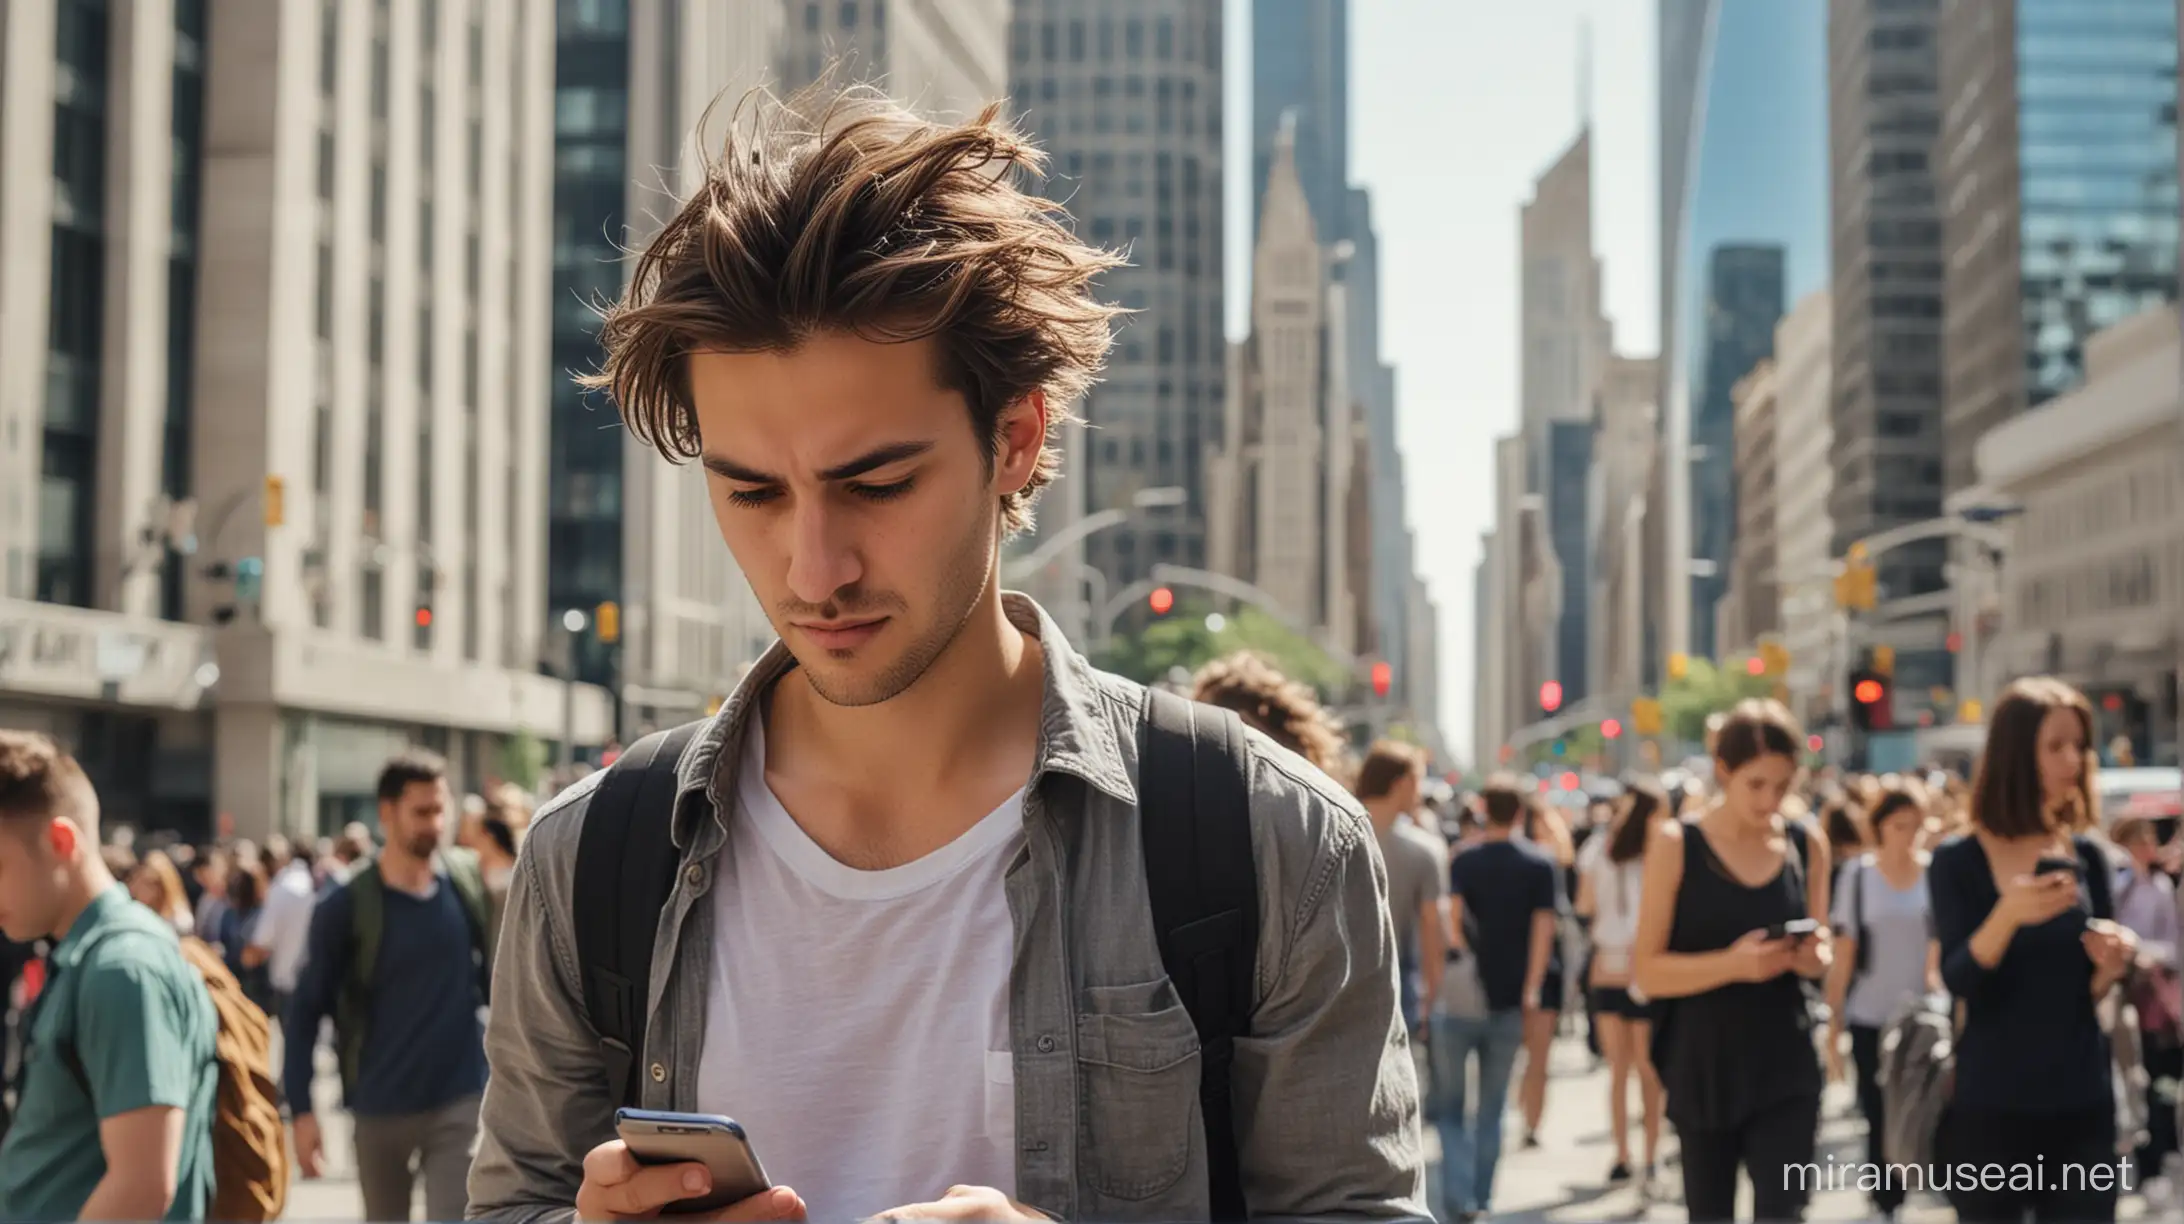  Bustling City Street (Day):  A crowded sidewalk with towering skyscrapers in the background. People walking hurriedly, some looking at their phones. Lio, a young man in his 20s with messy hair, looking down at his phone with a tired expression